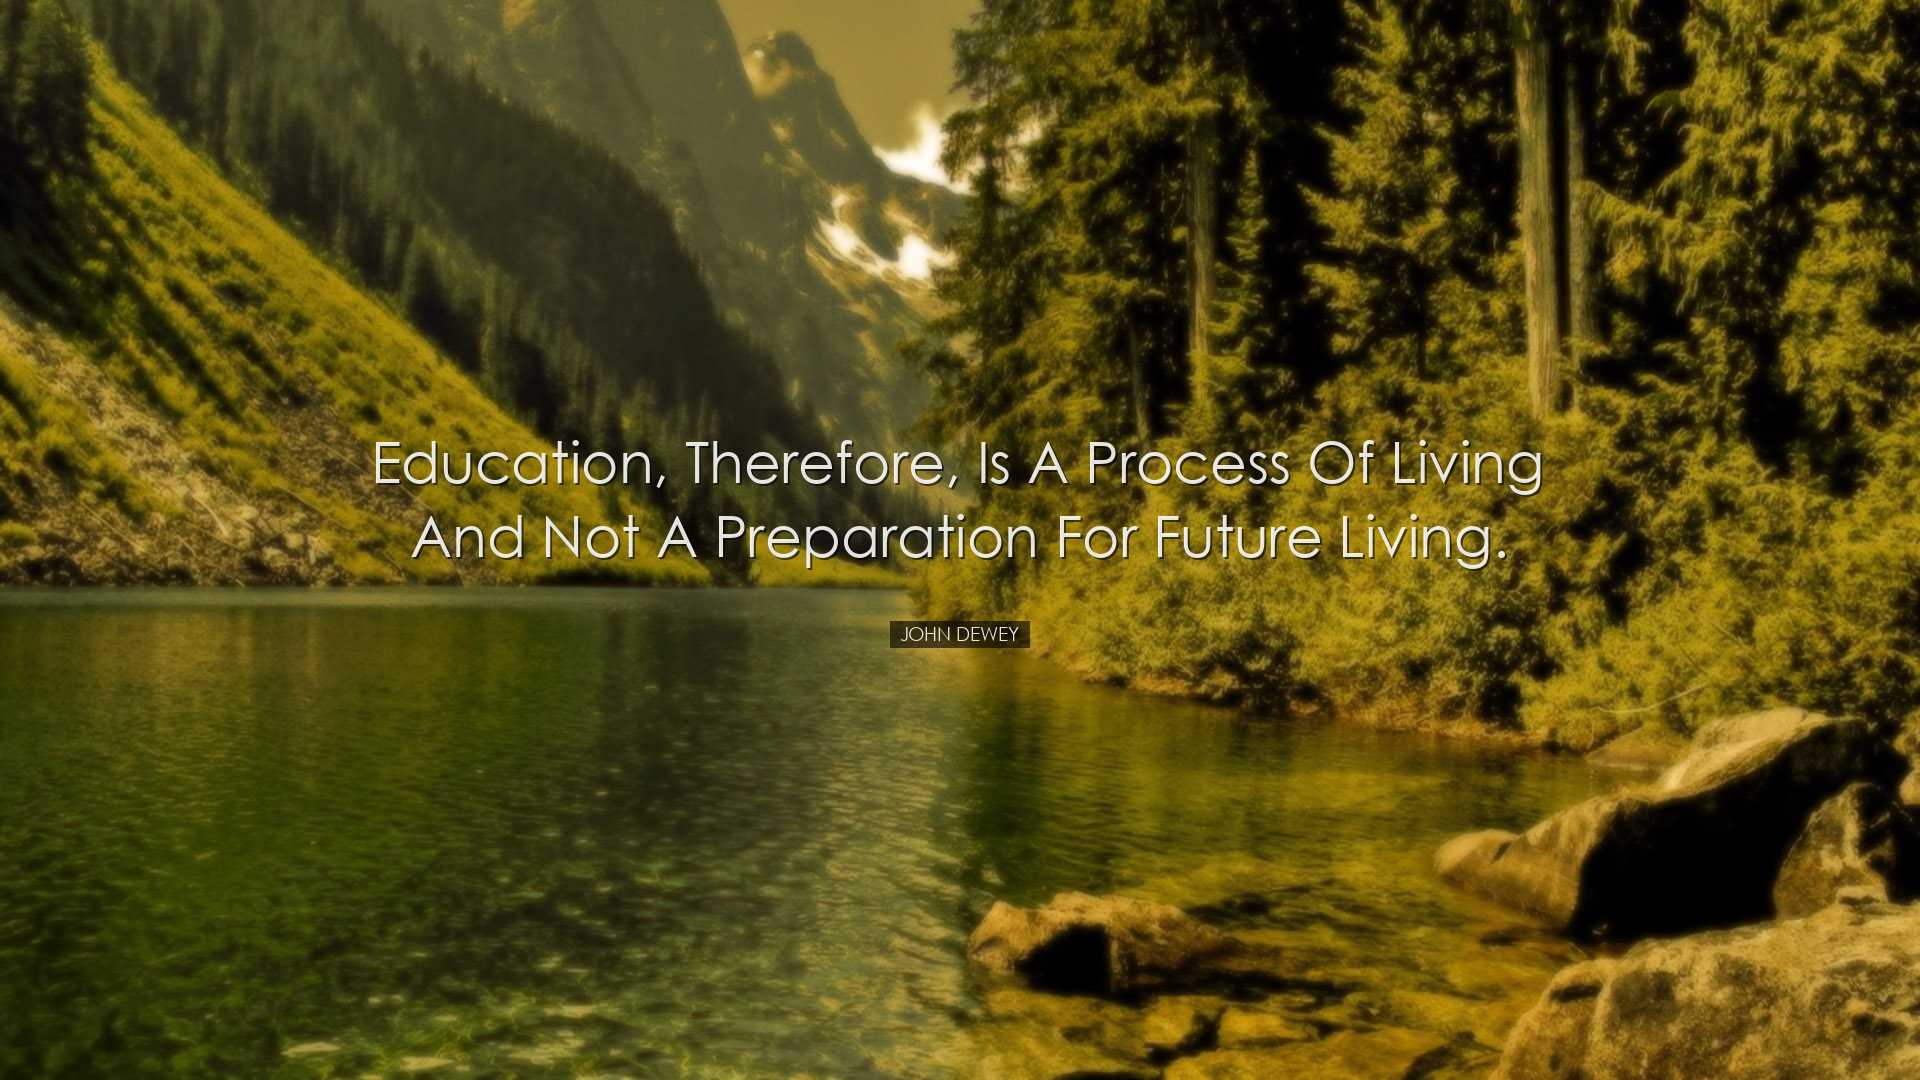 Education, therefore, is a process of living and not a preparation